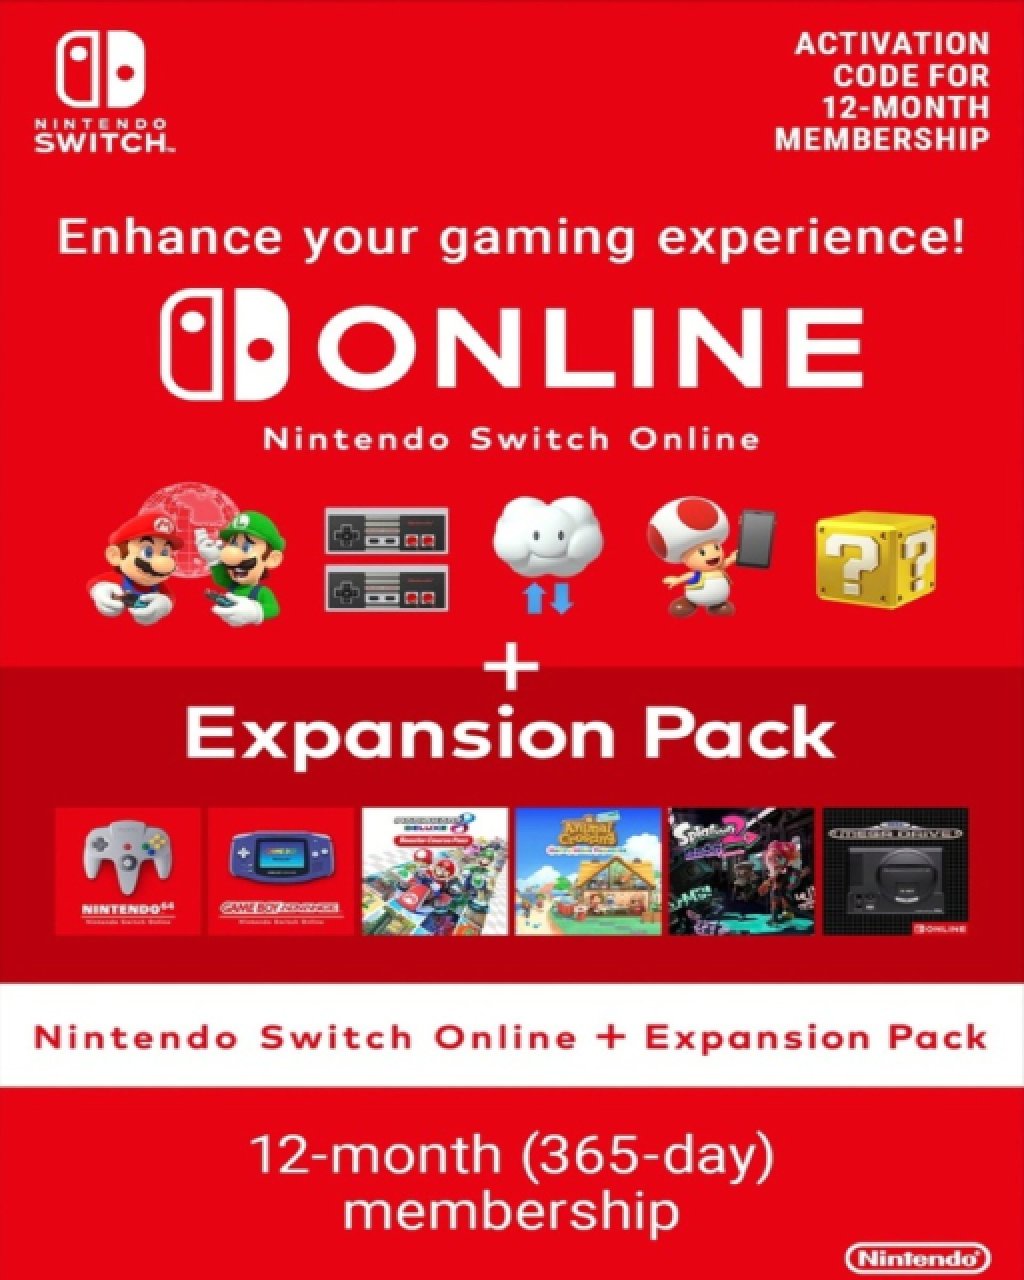 Switch Family + Expansion Pack Individual Members